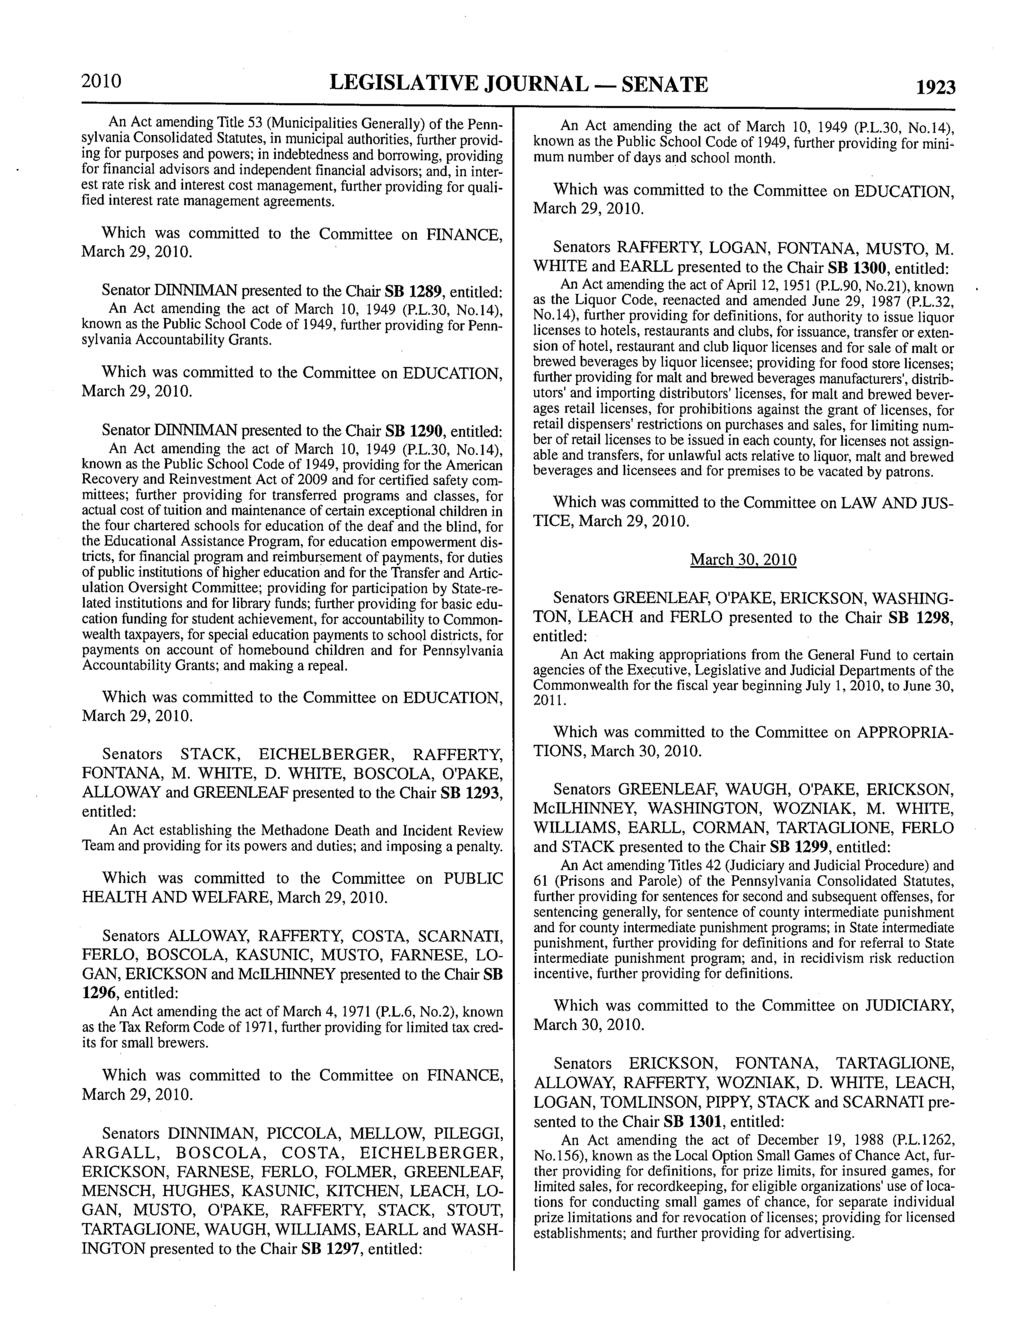 2010 LEGISLATIVE JOURNAL - SENATE 1923 An Act amending Title 53 (Municipalities Generally) of the Pennsylvania Consolidated Statutes, in municipal authorities, further providing for purposes and